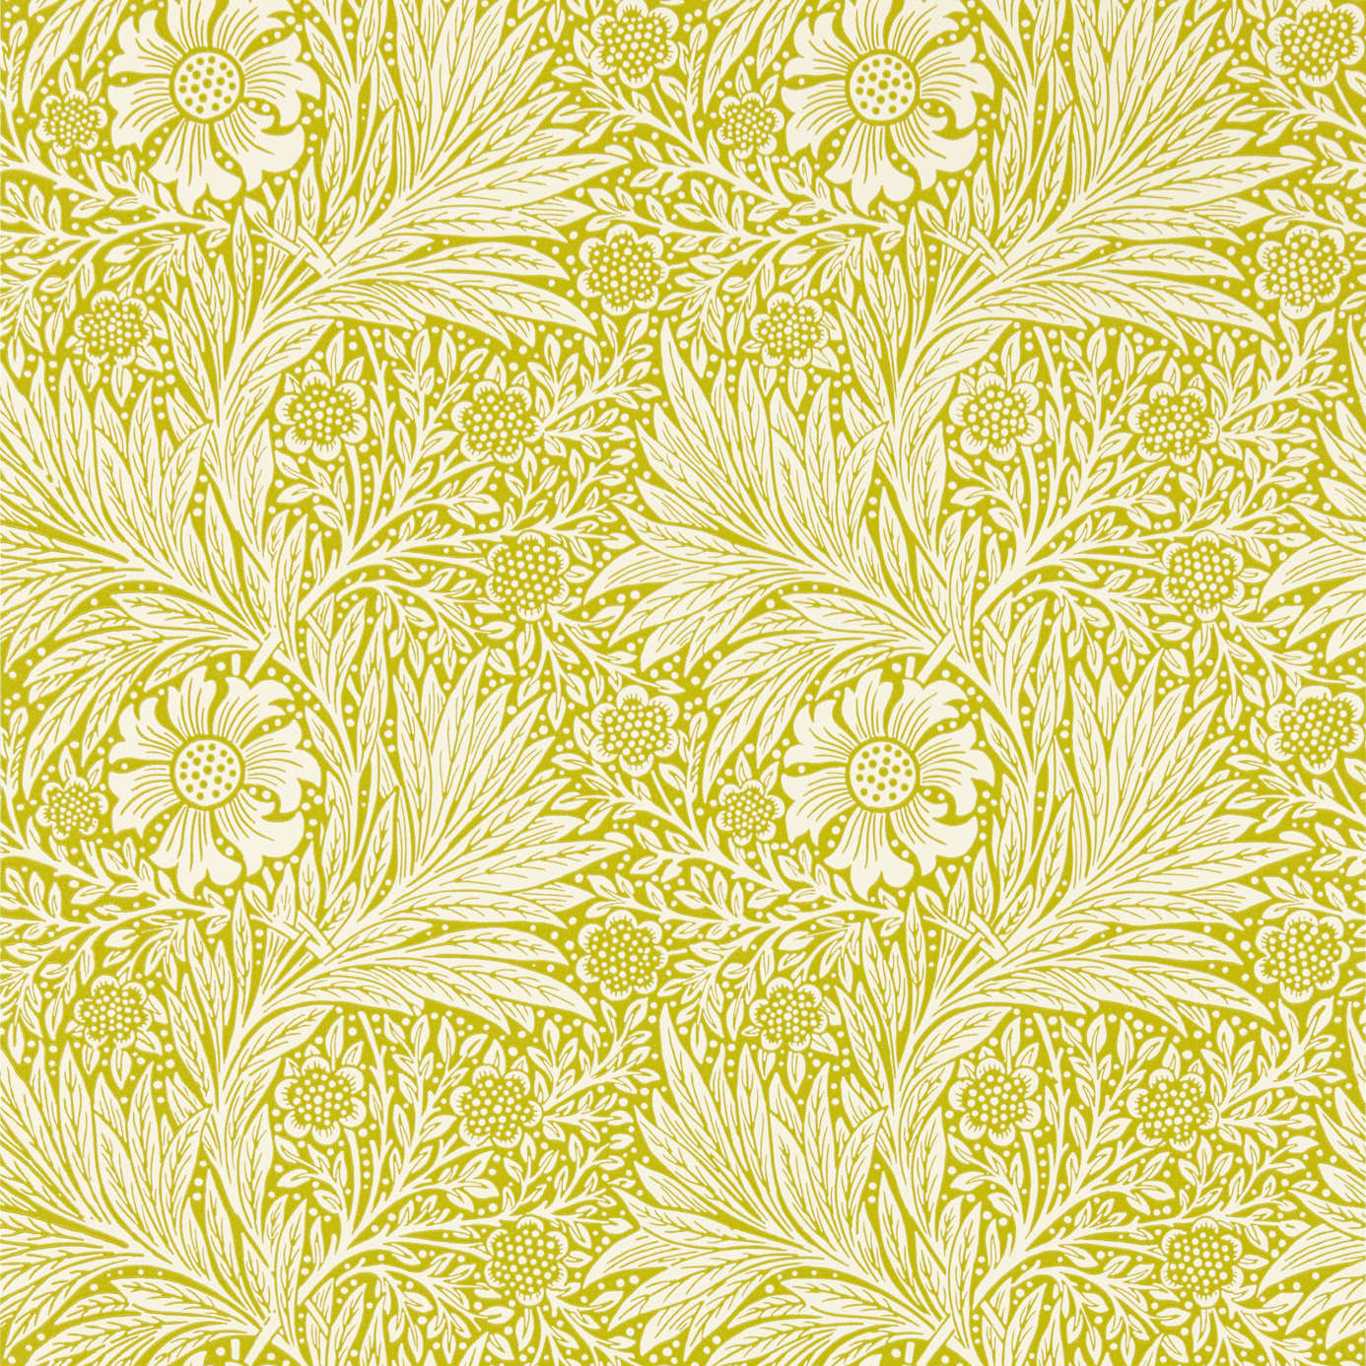 Marigold Chartreuse Wallpaper MCOW217092 by Morris & Co